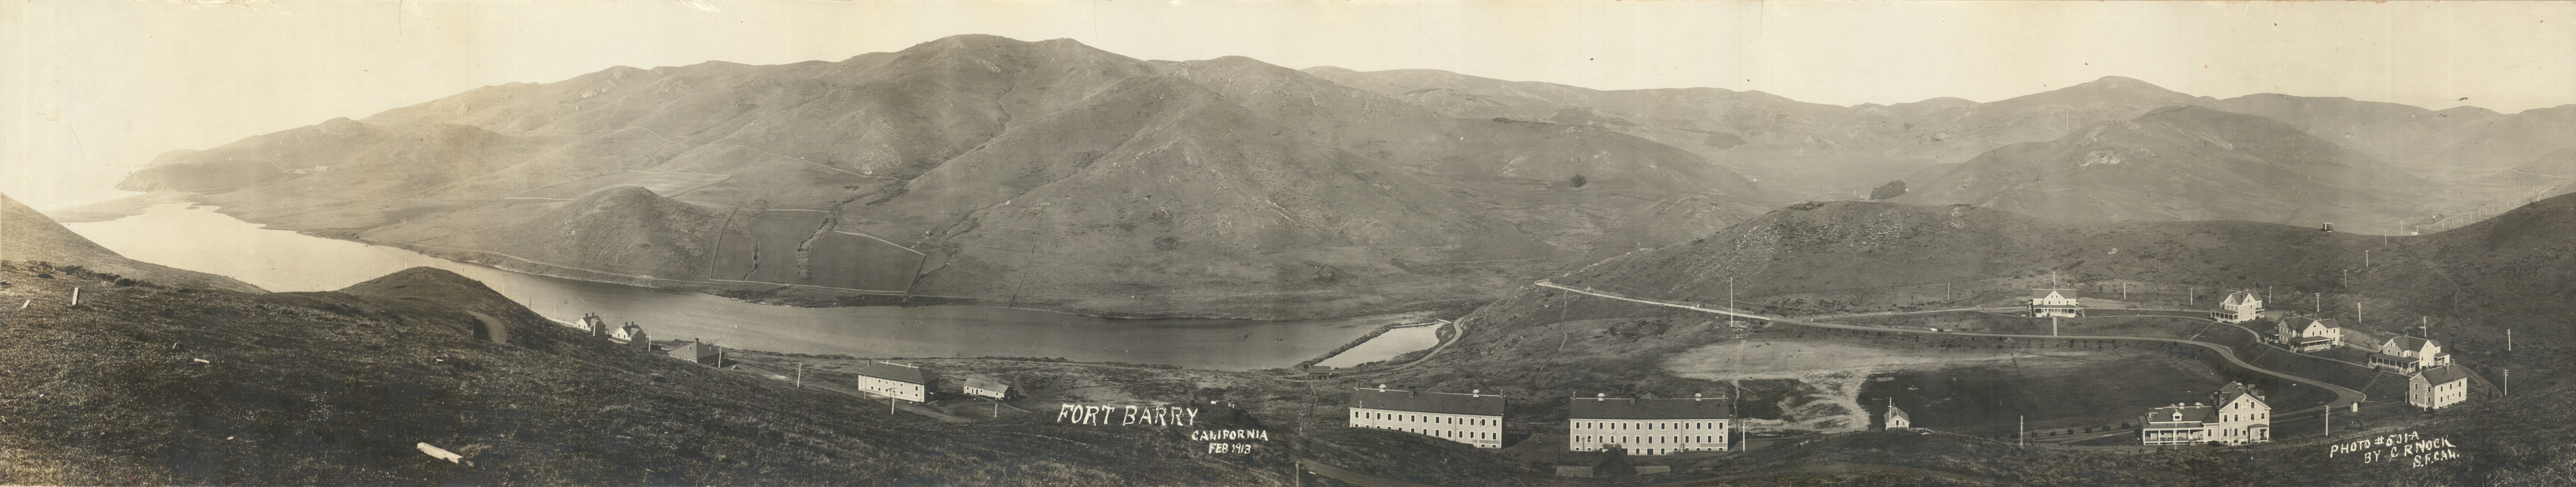 A closely Cropped image of Fort Barry, Marin Headlands from 1913 